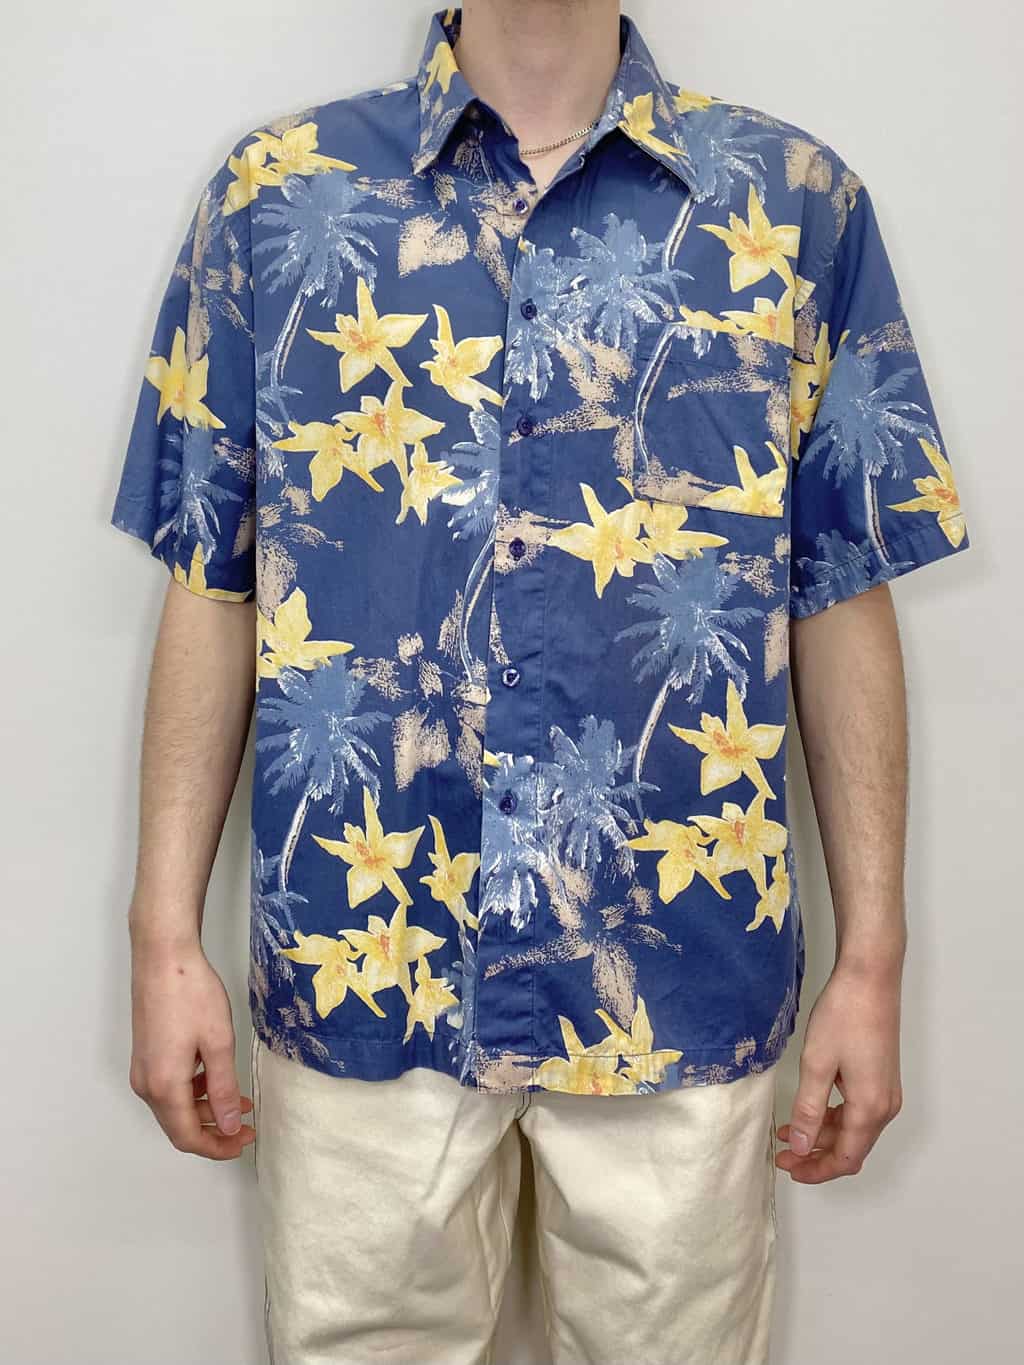 Vintage Hawaiian shirt with palm trees and bright yellow floral ...